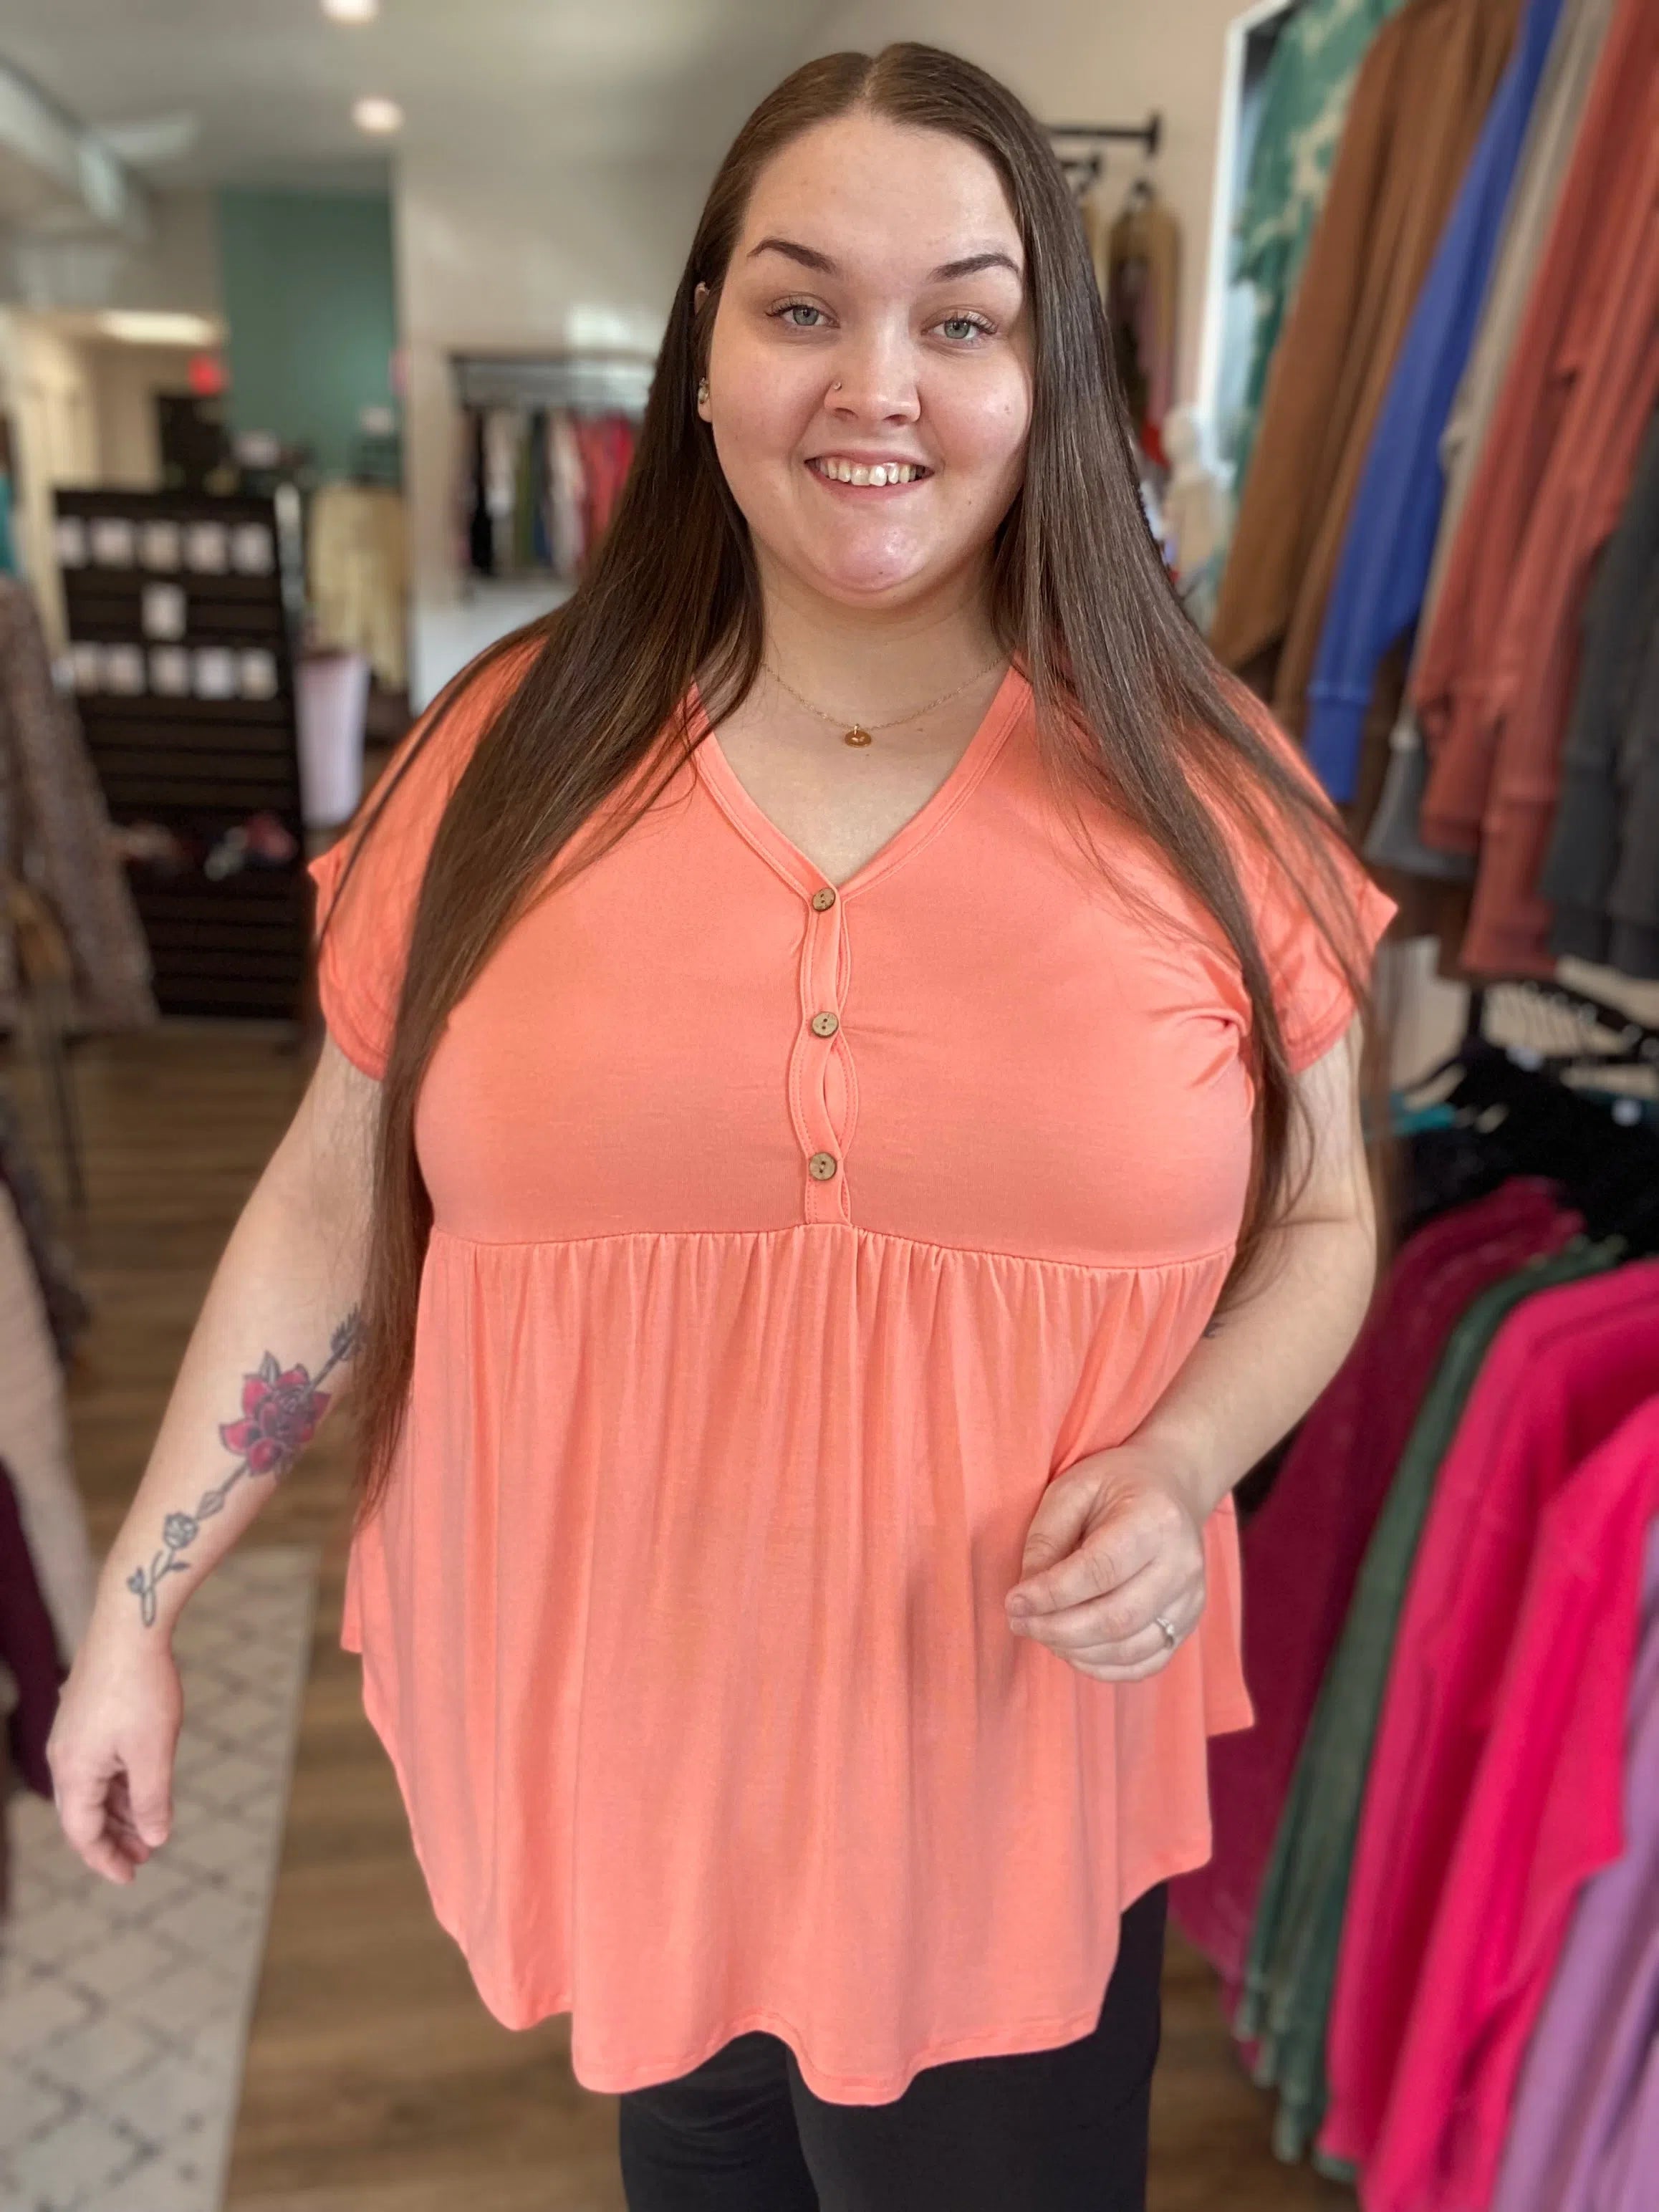 Shop Malia Bamboo Babydoll Top with Buttons - Tropical Coral-Shirts & Tops at Ruby Joy Boutique, a Women's Clothing Store in Pickerington, Ohio